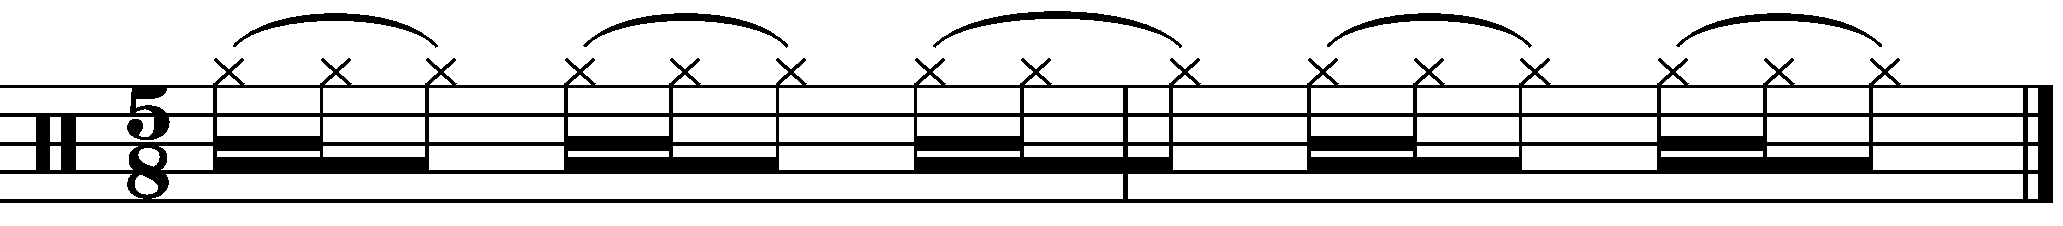 The base rhythm for these grooves